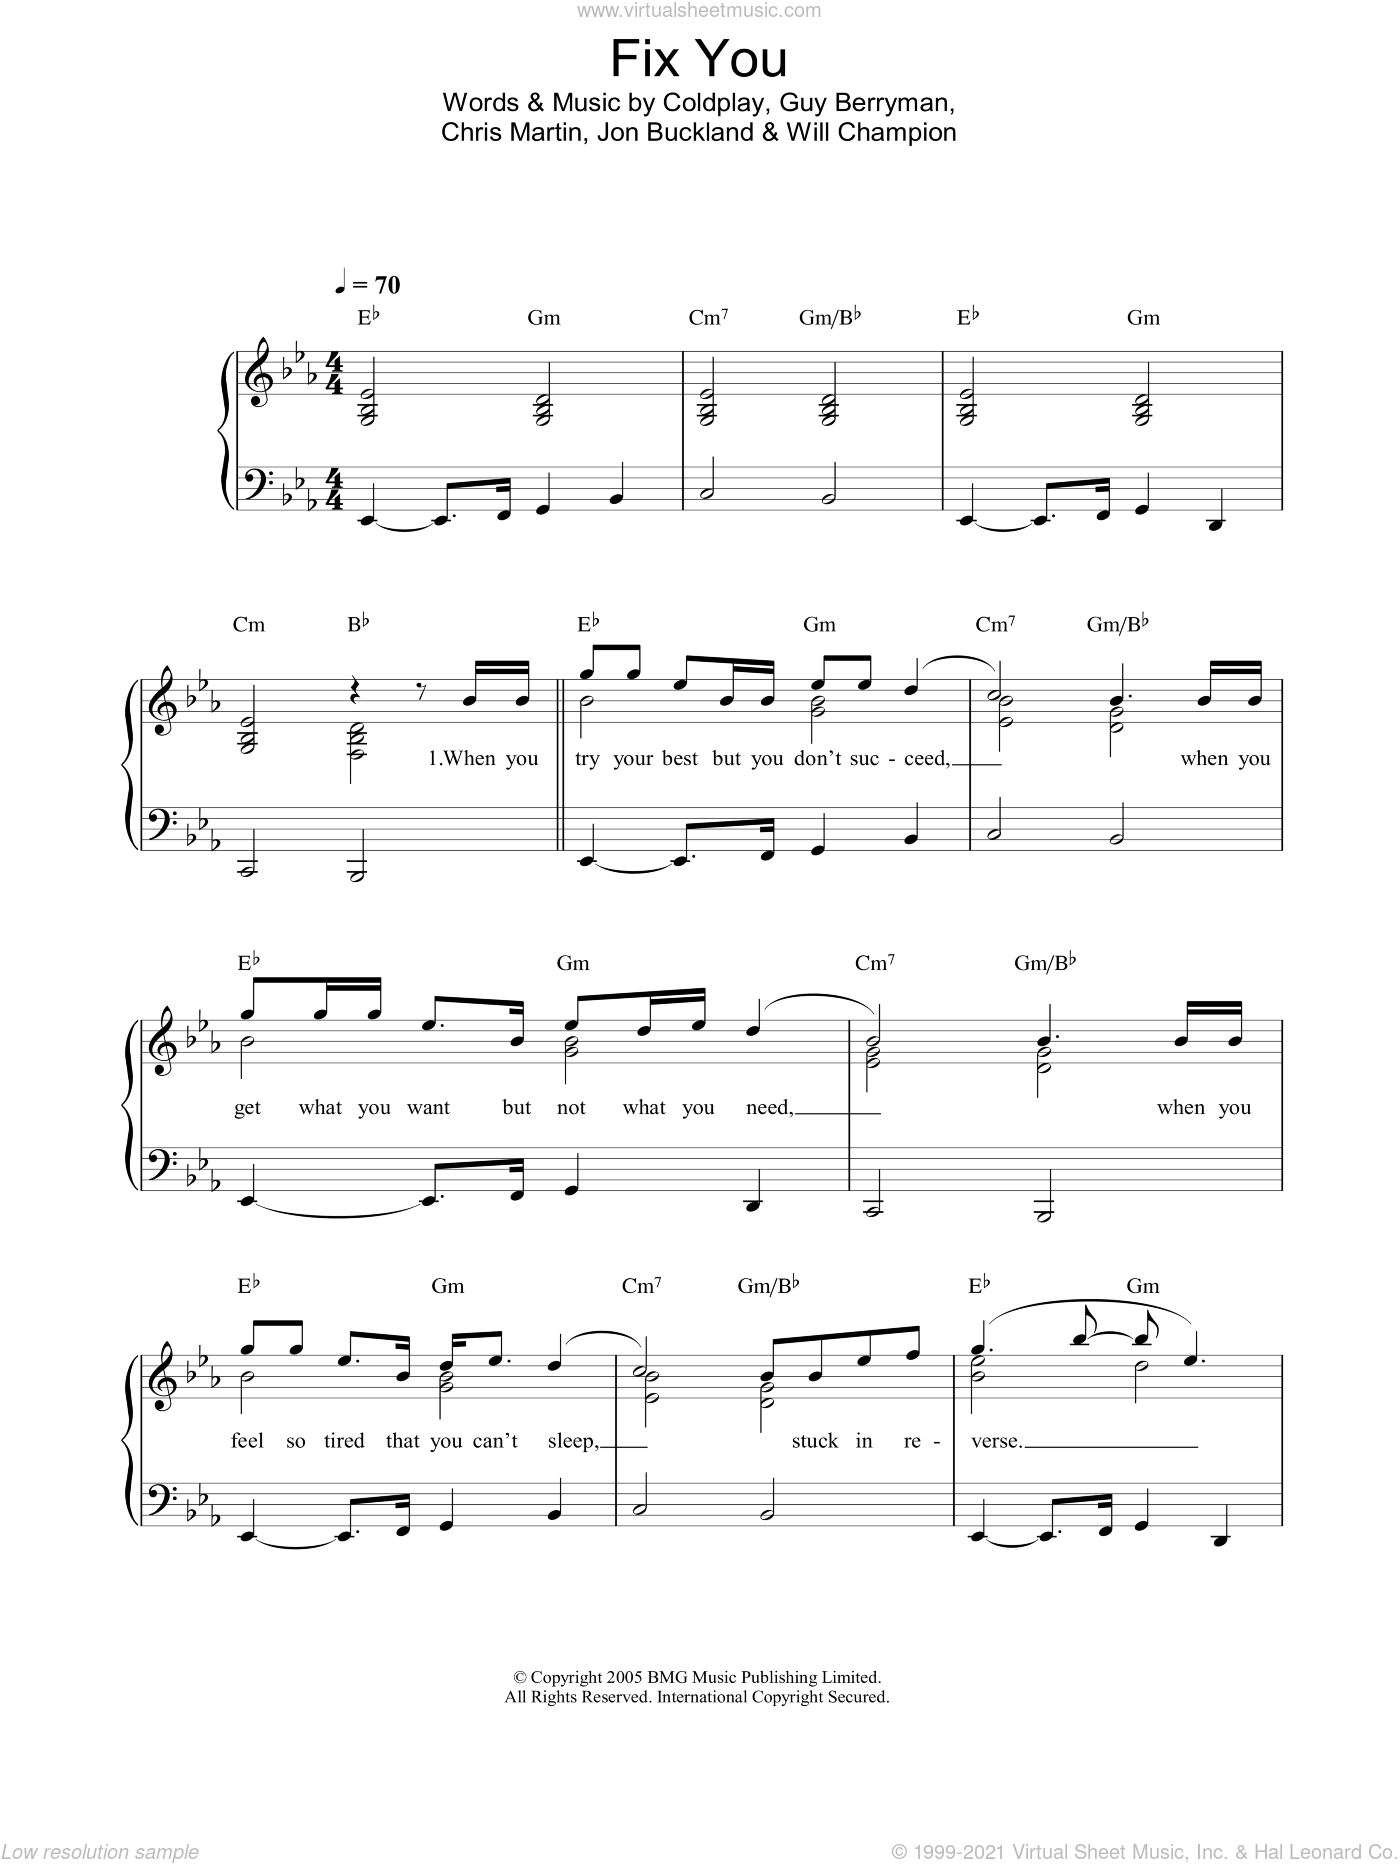 Coldplay - Fix You sheet music for piano solo